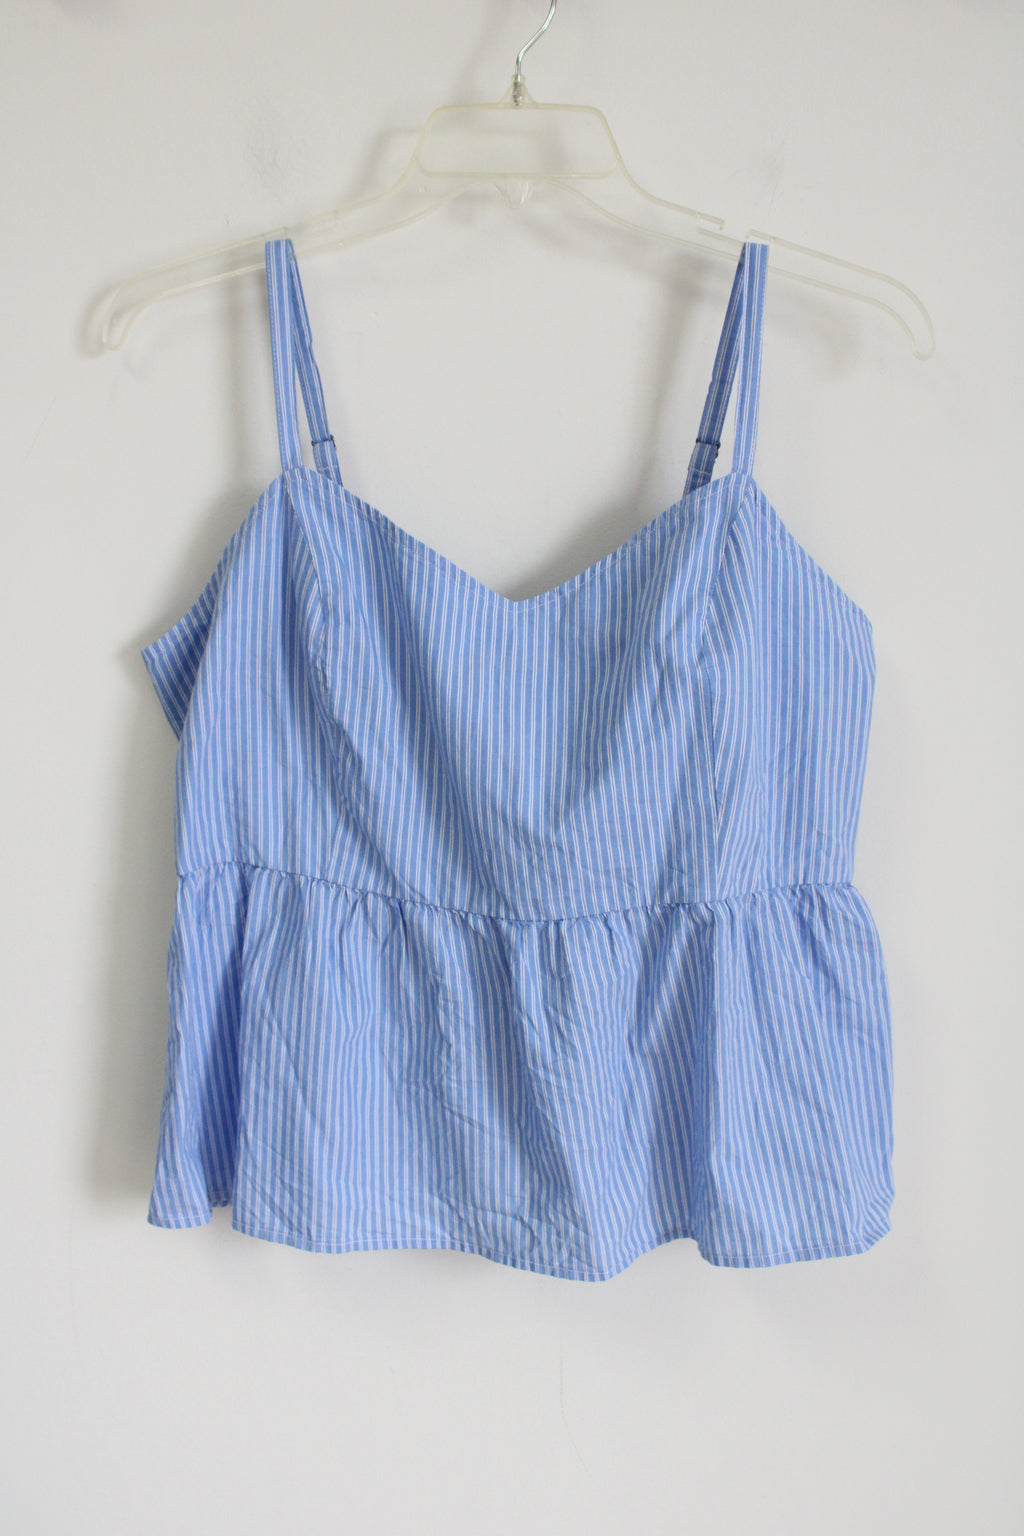 NEW Old Navy Blue Striped Tank Top | L